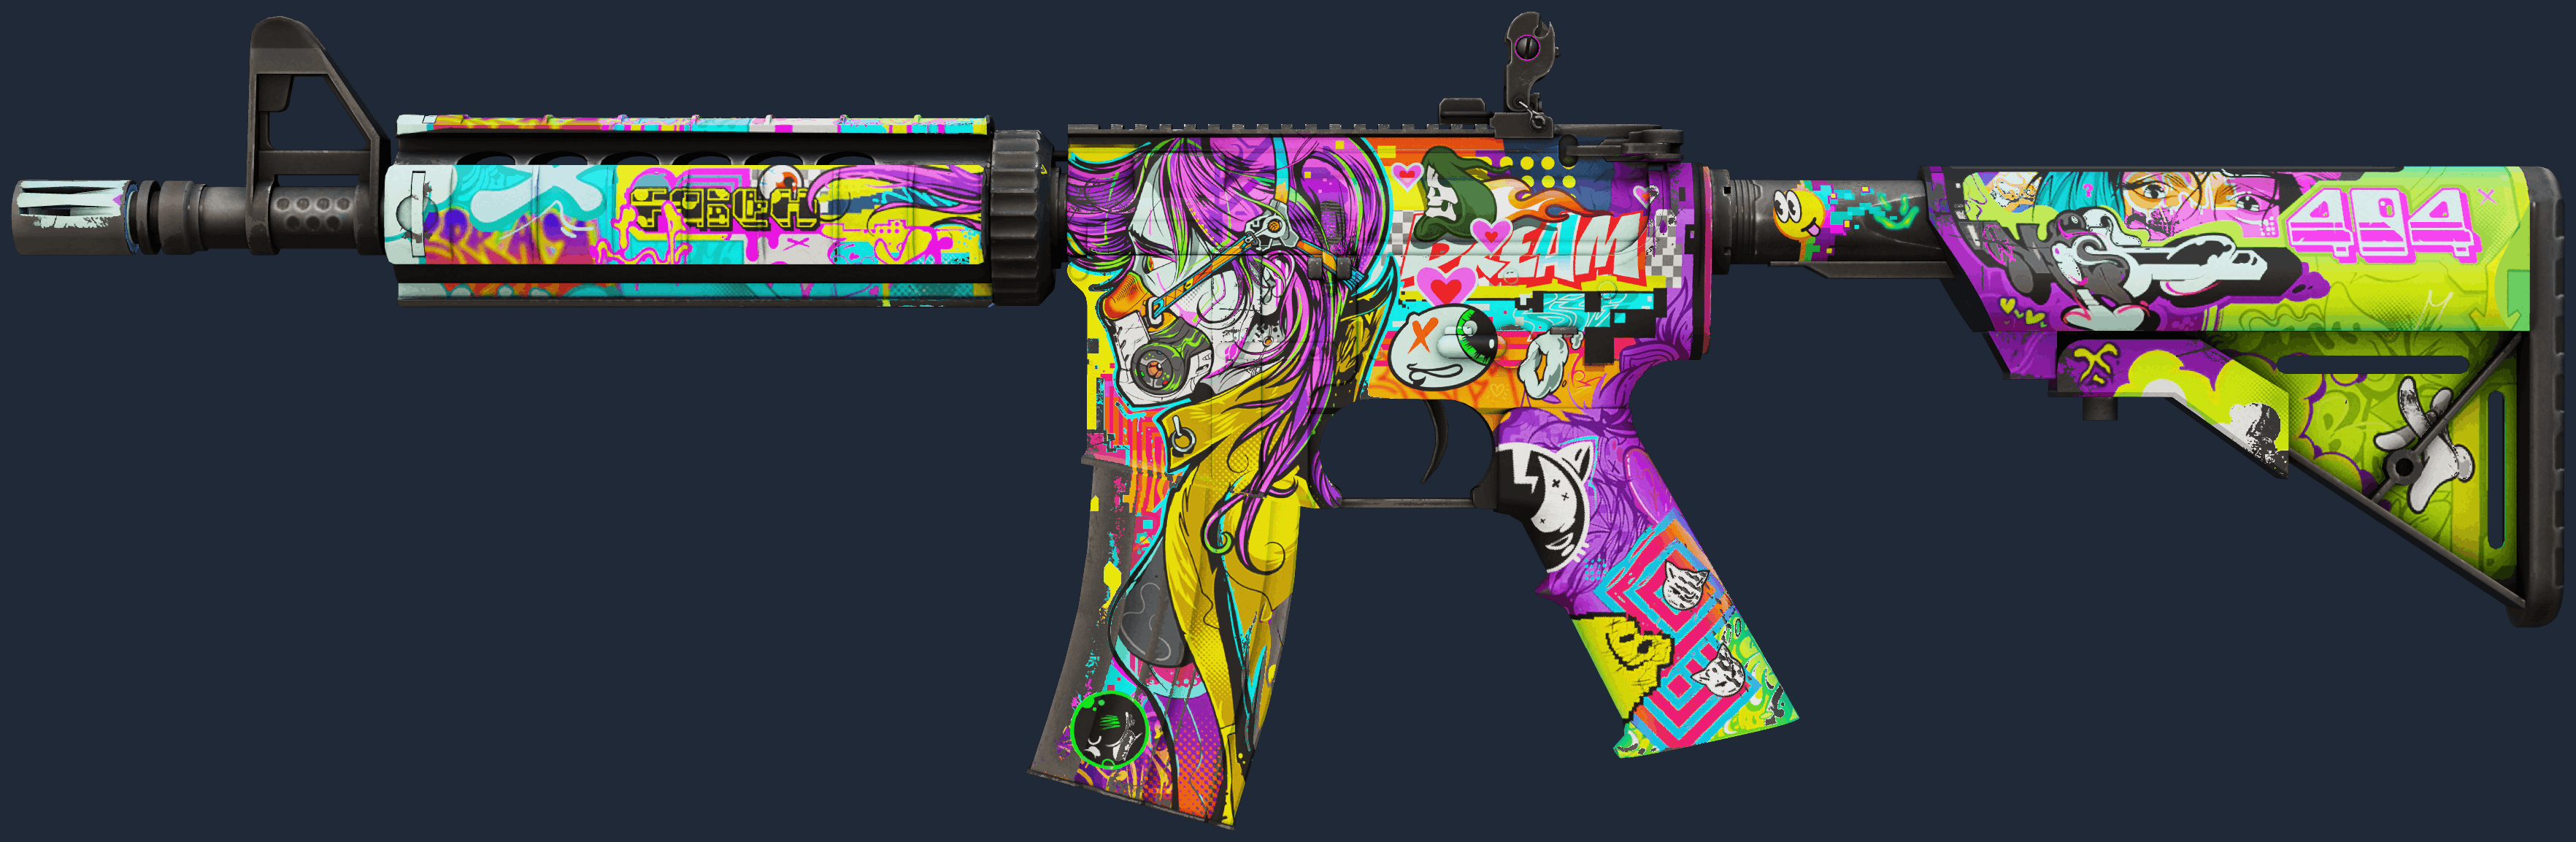 M4A4 | In Living Color Screenshot